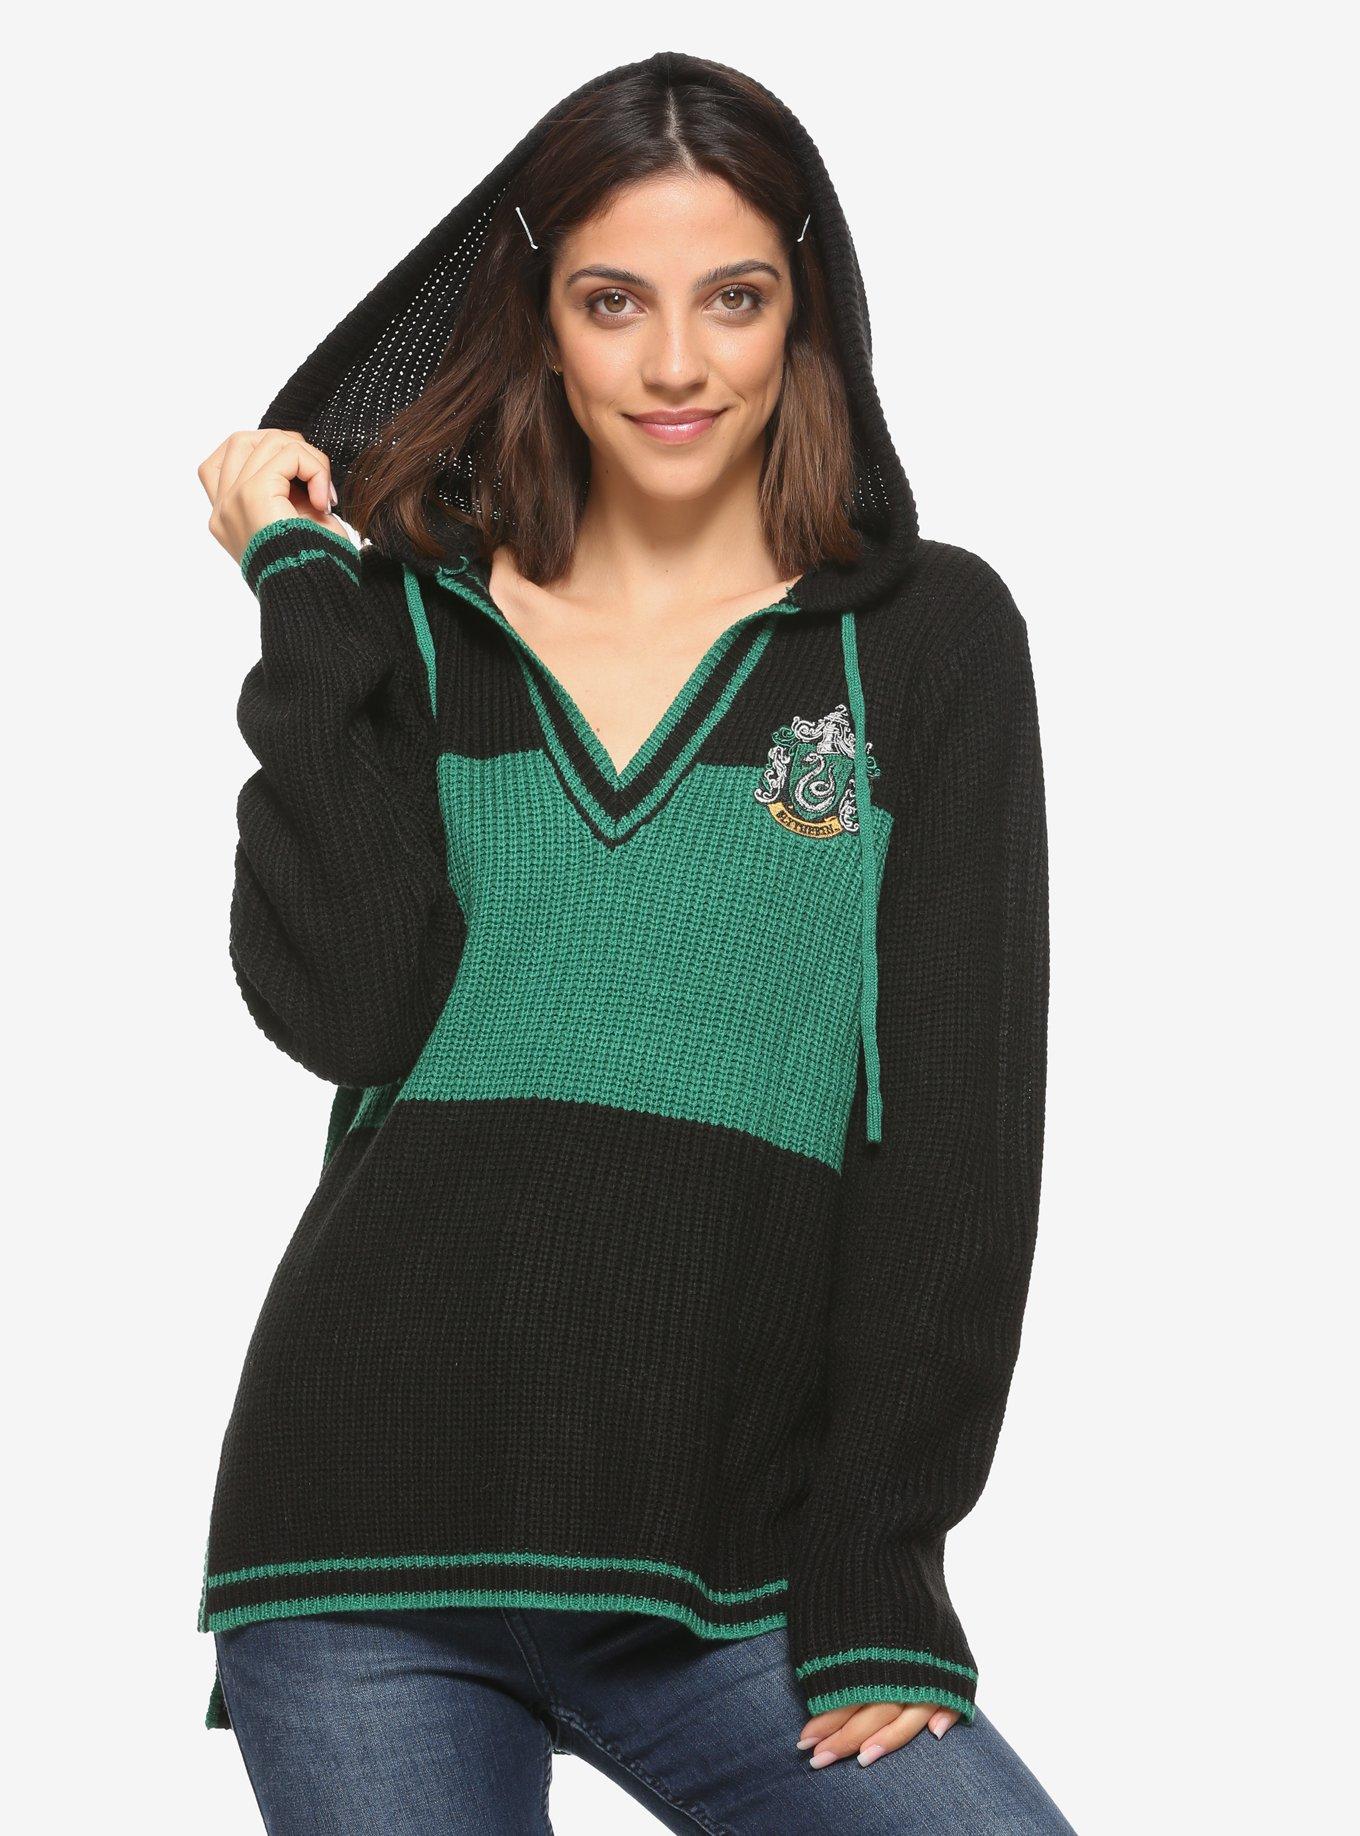 Harry Potter Slytherin Girls Hooded Sweater